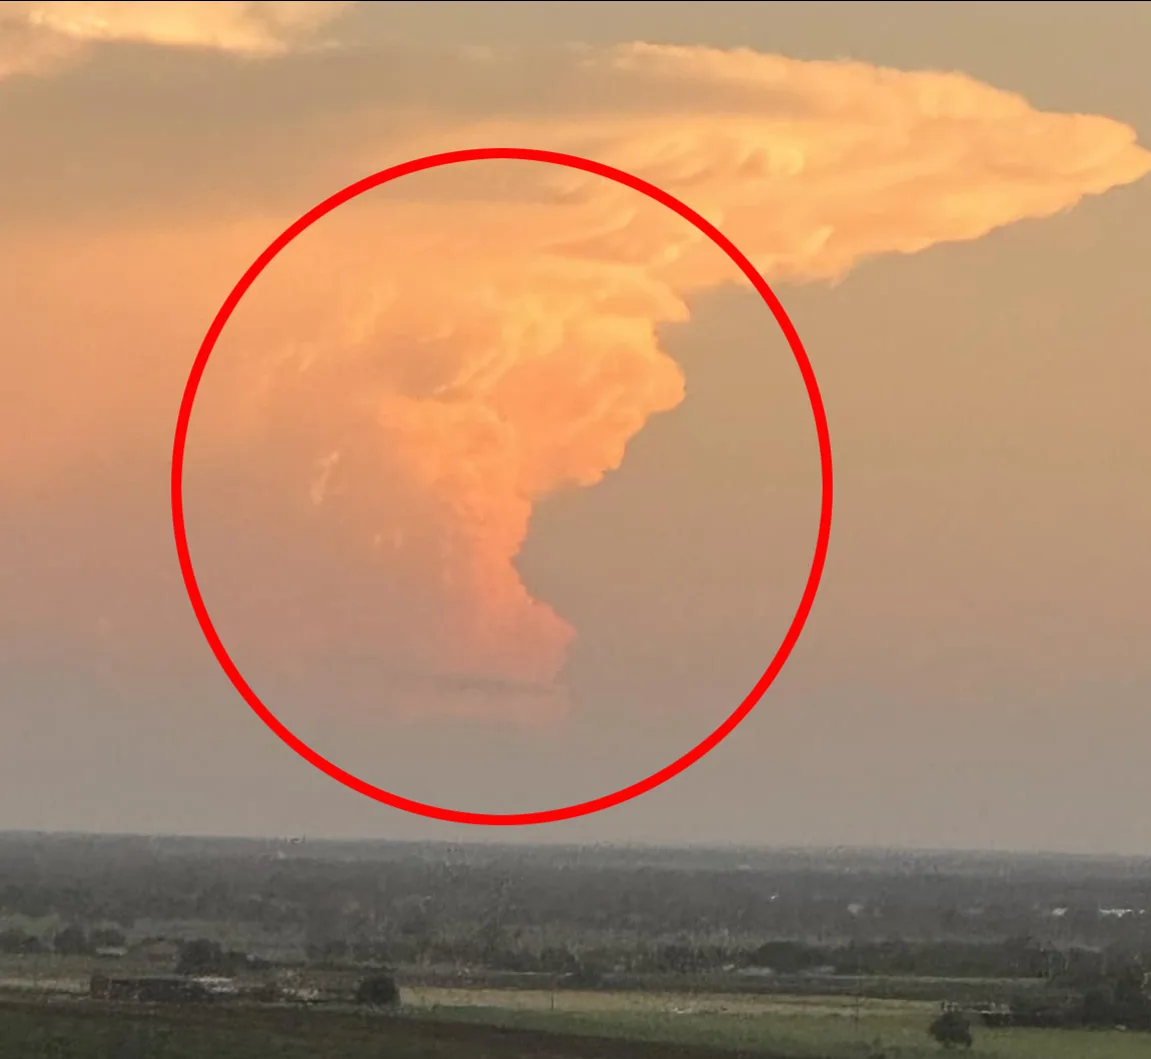 cloud spotted in Brisbane, Australia by Hayley Skye, that bears an uncanny resemblance to Donald Trump goes viral on social media.